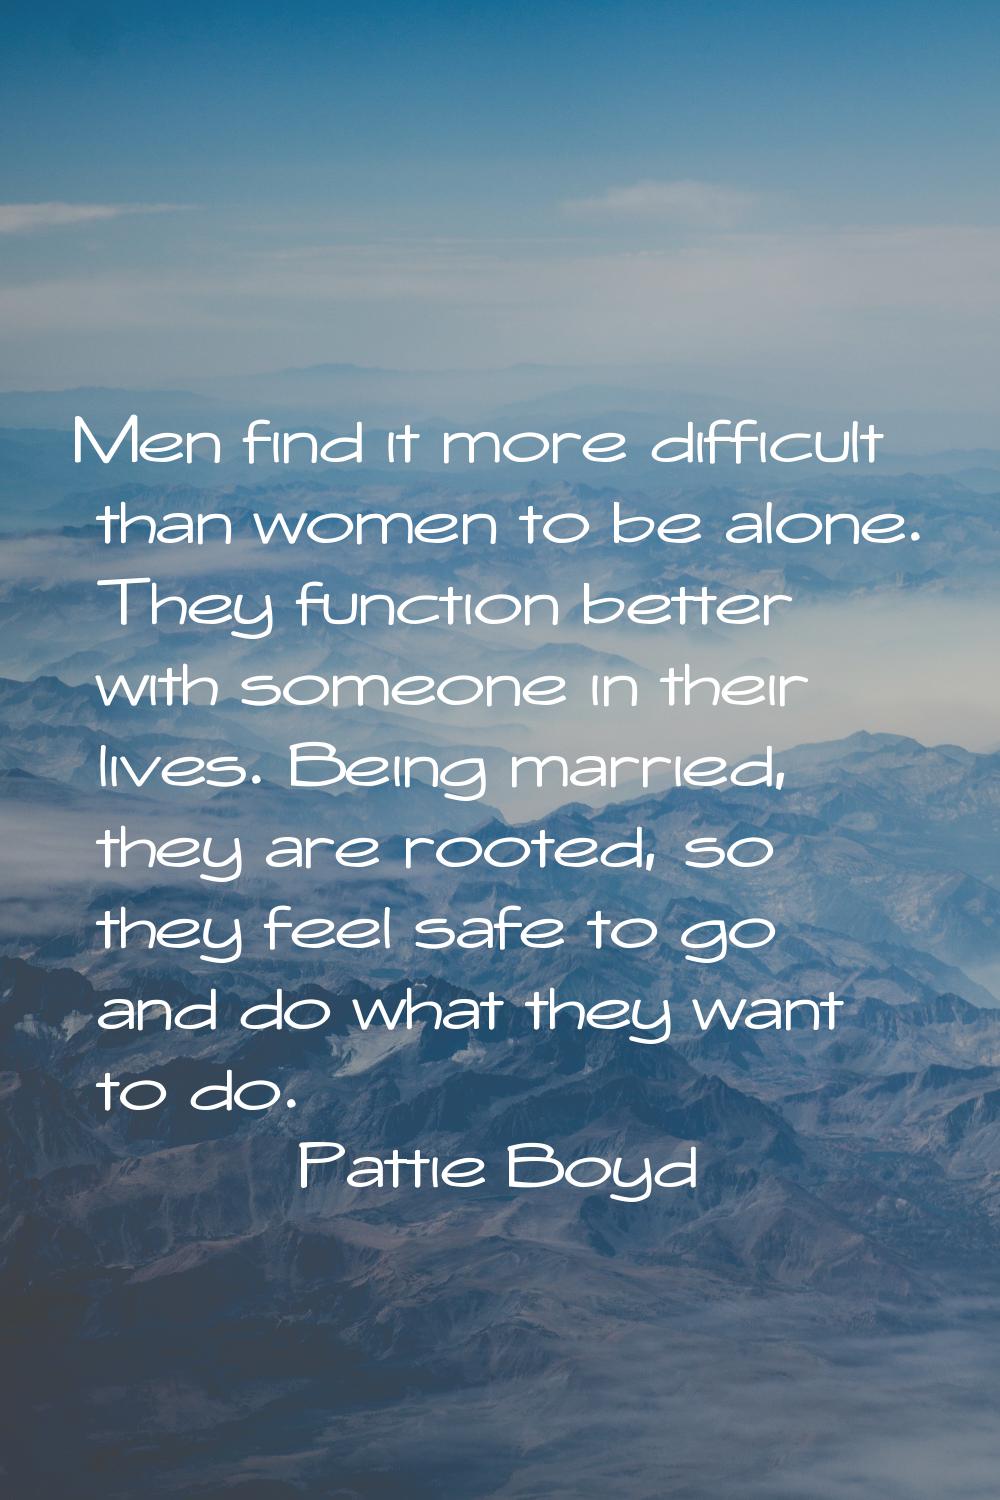 Men find it more difficult than women to be alone. They function better with someone in their lives